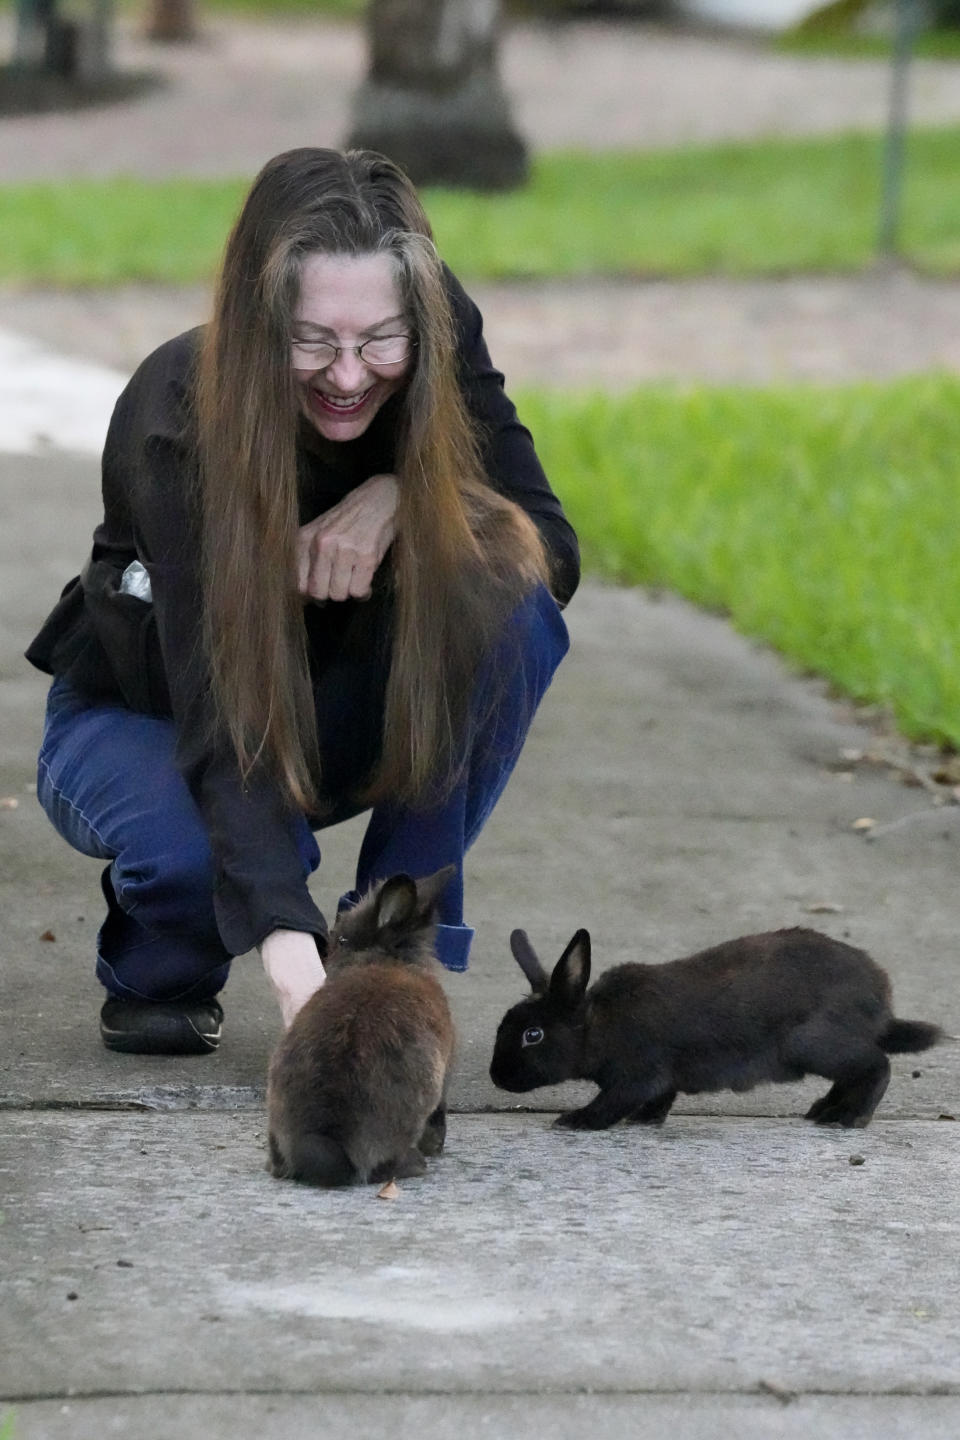 Alicia Griggs feeds rabbits outside her home, Tuesday, July 11, 2023, in Wilton Manors, Fla. Griggs is spearheading efforts to raise the $20,000 to $40,000 it would cost for a rescue group to capture, neuter, vaccinate, shelter and then give away the estimated 60 to 100 lionhead rabbits that now populate Jenada Isles, an 81-home community in Wilton Manors. (AP Photo/Wilfredo Lee)